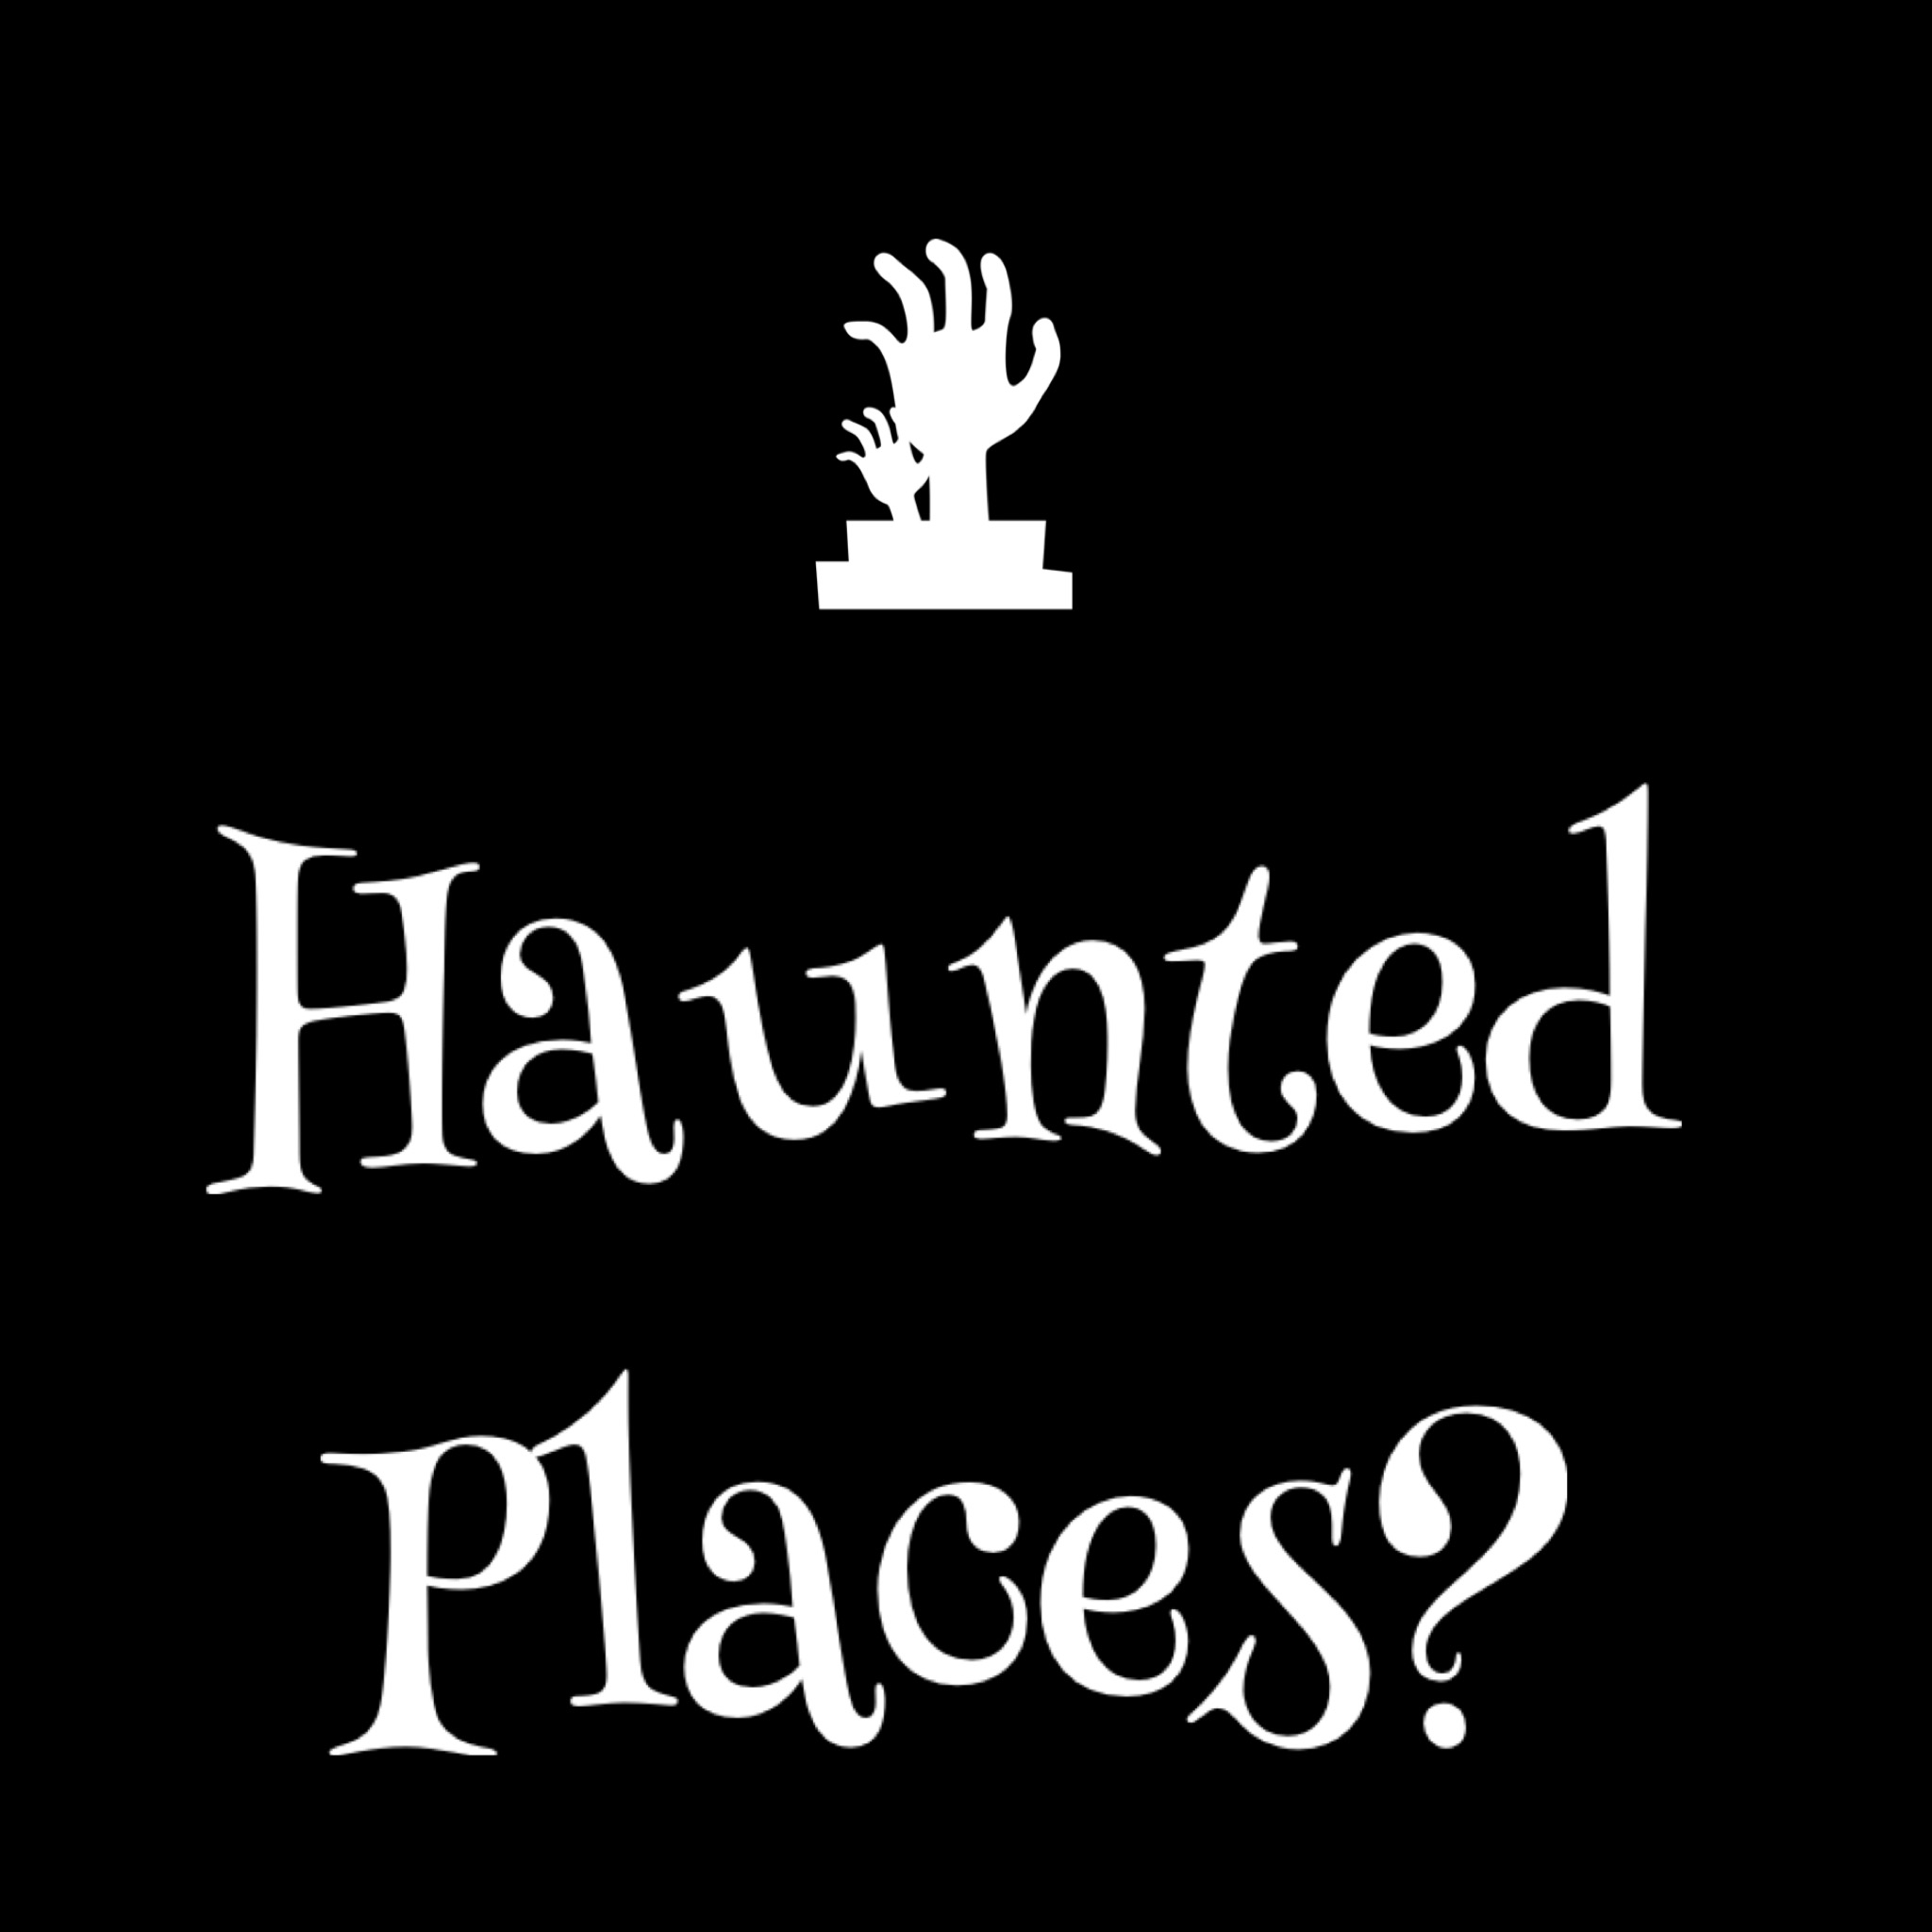 Haunted Places?